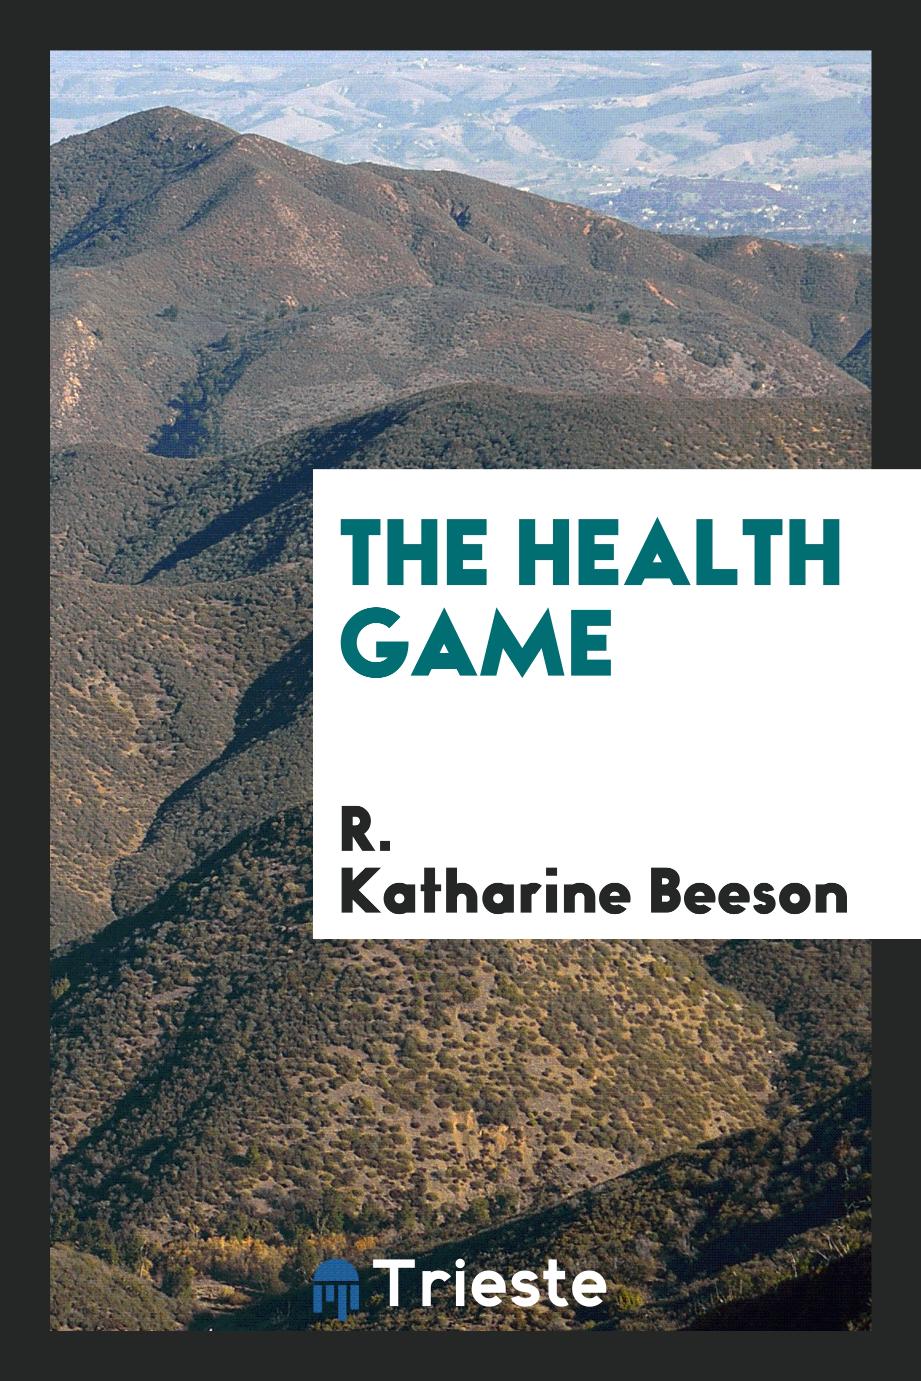 The health game